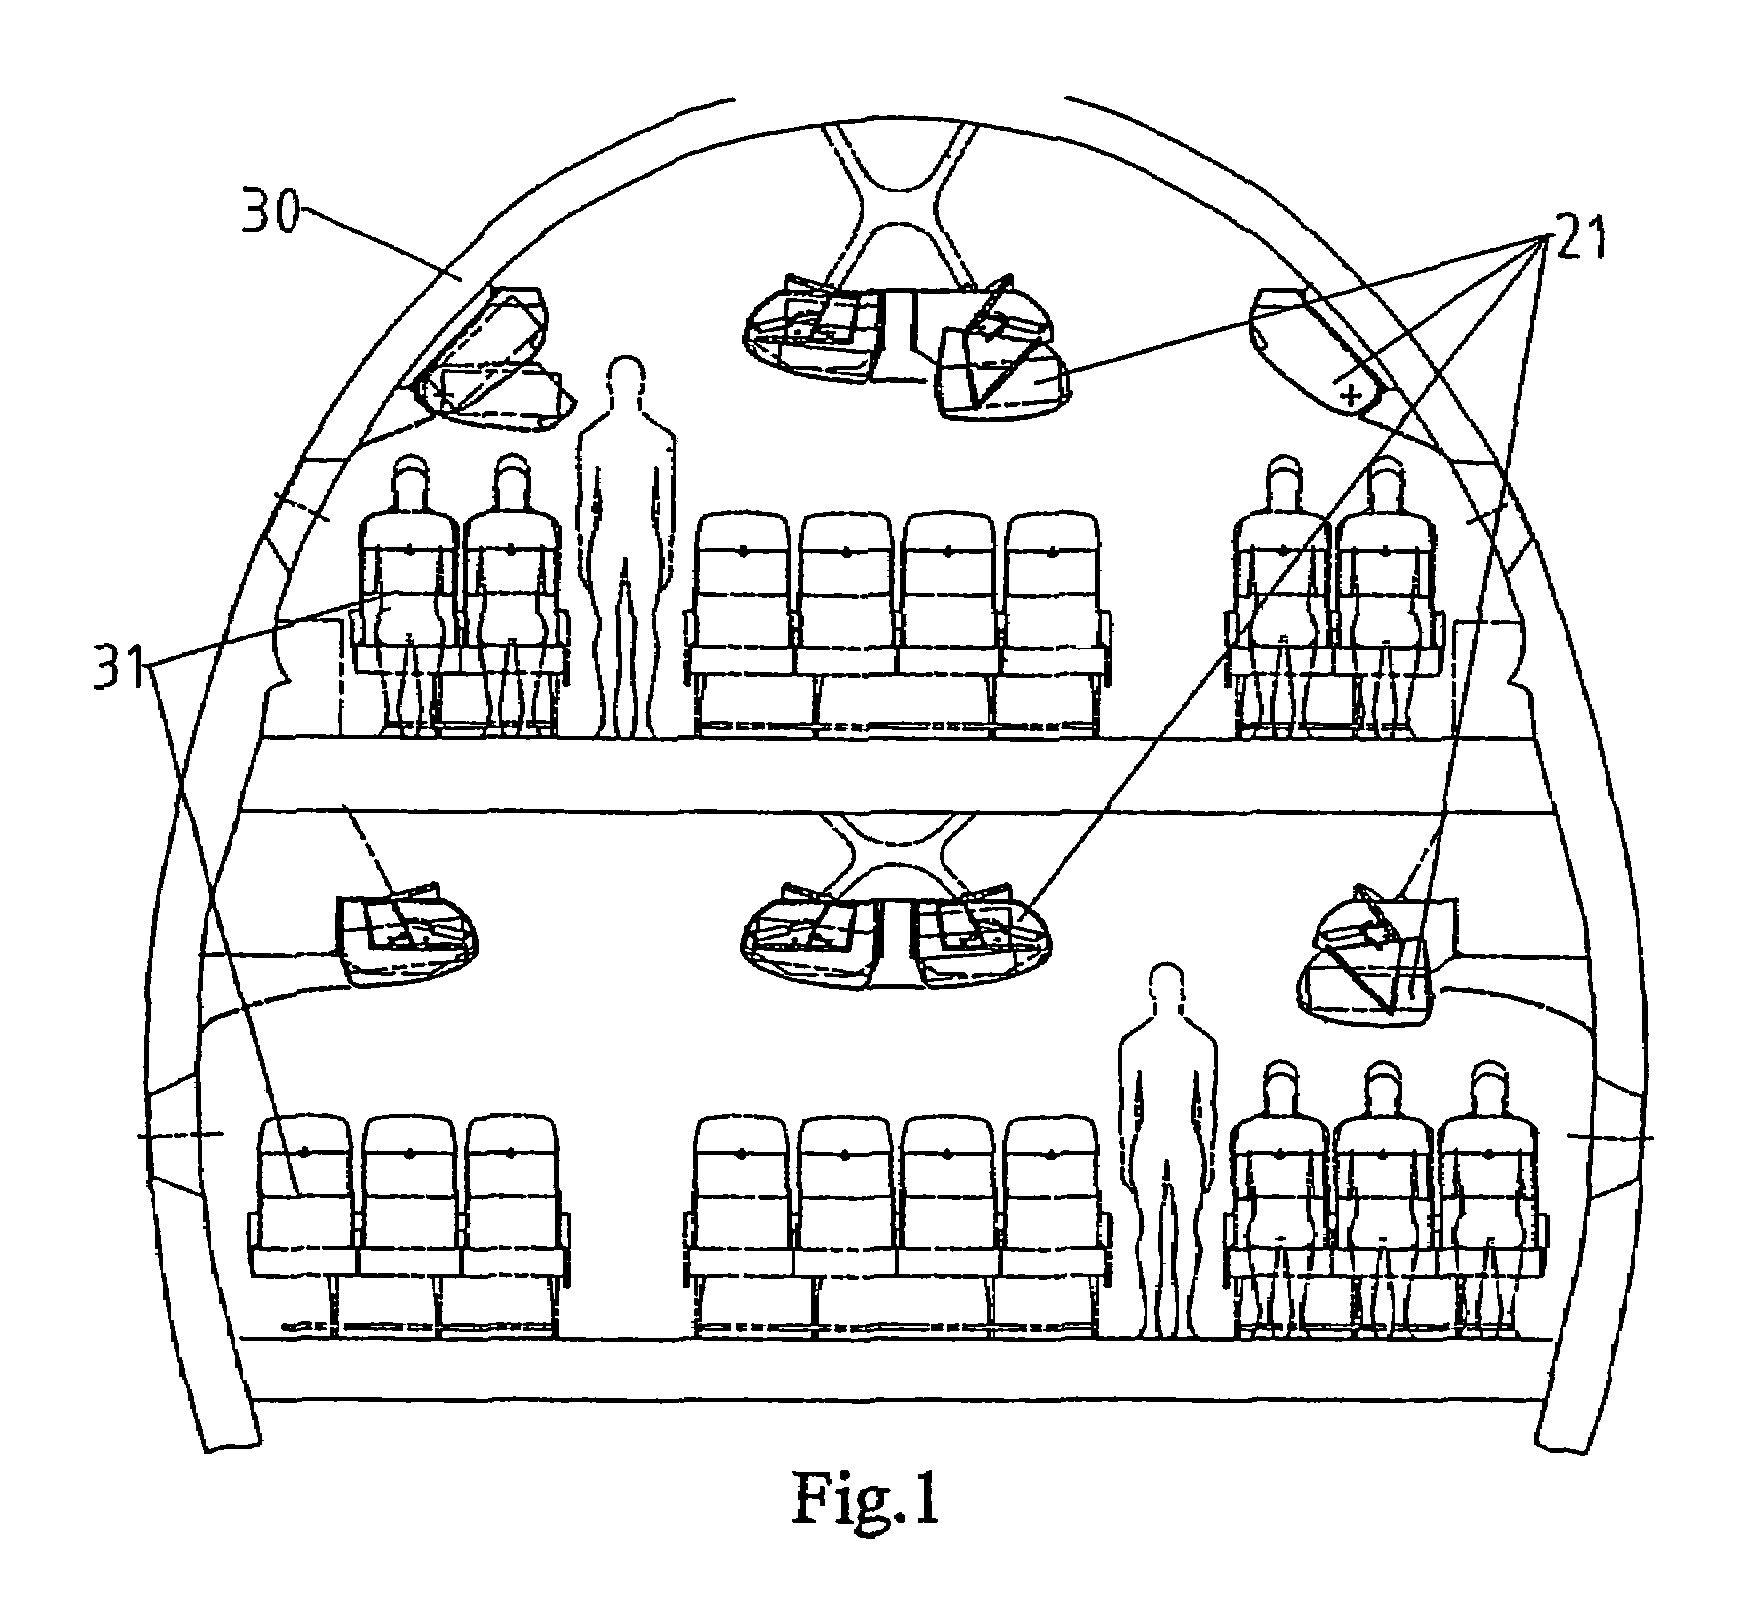 Suspension device for lowerable luggage compartments